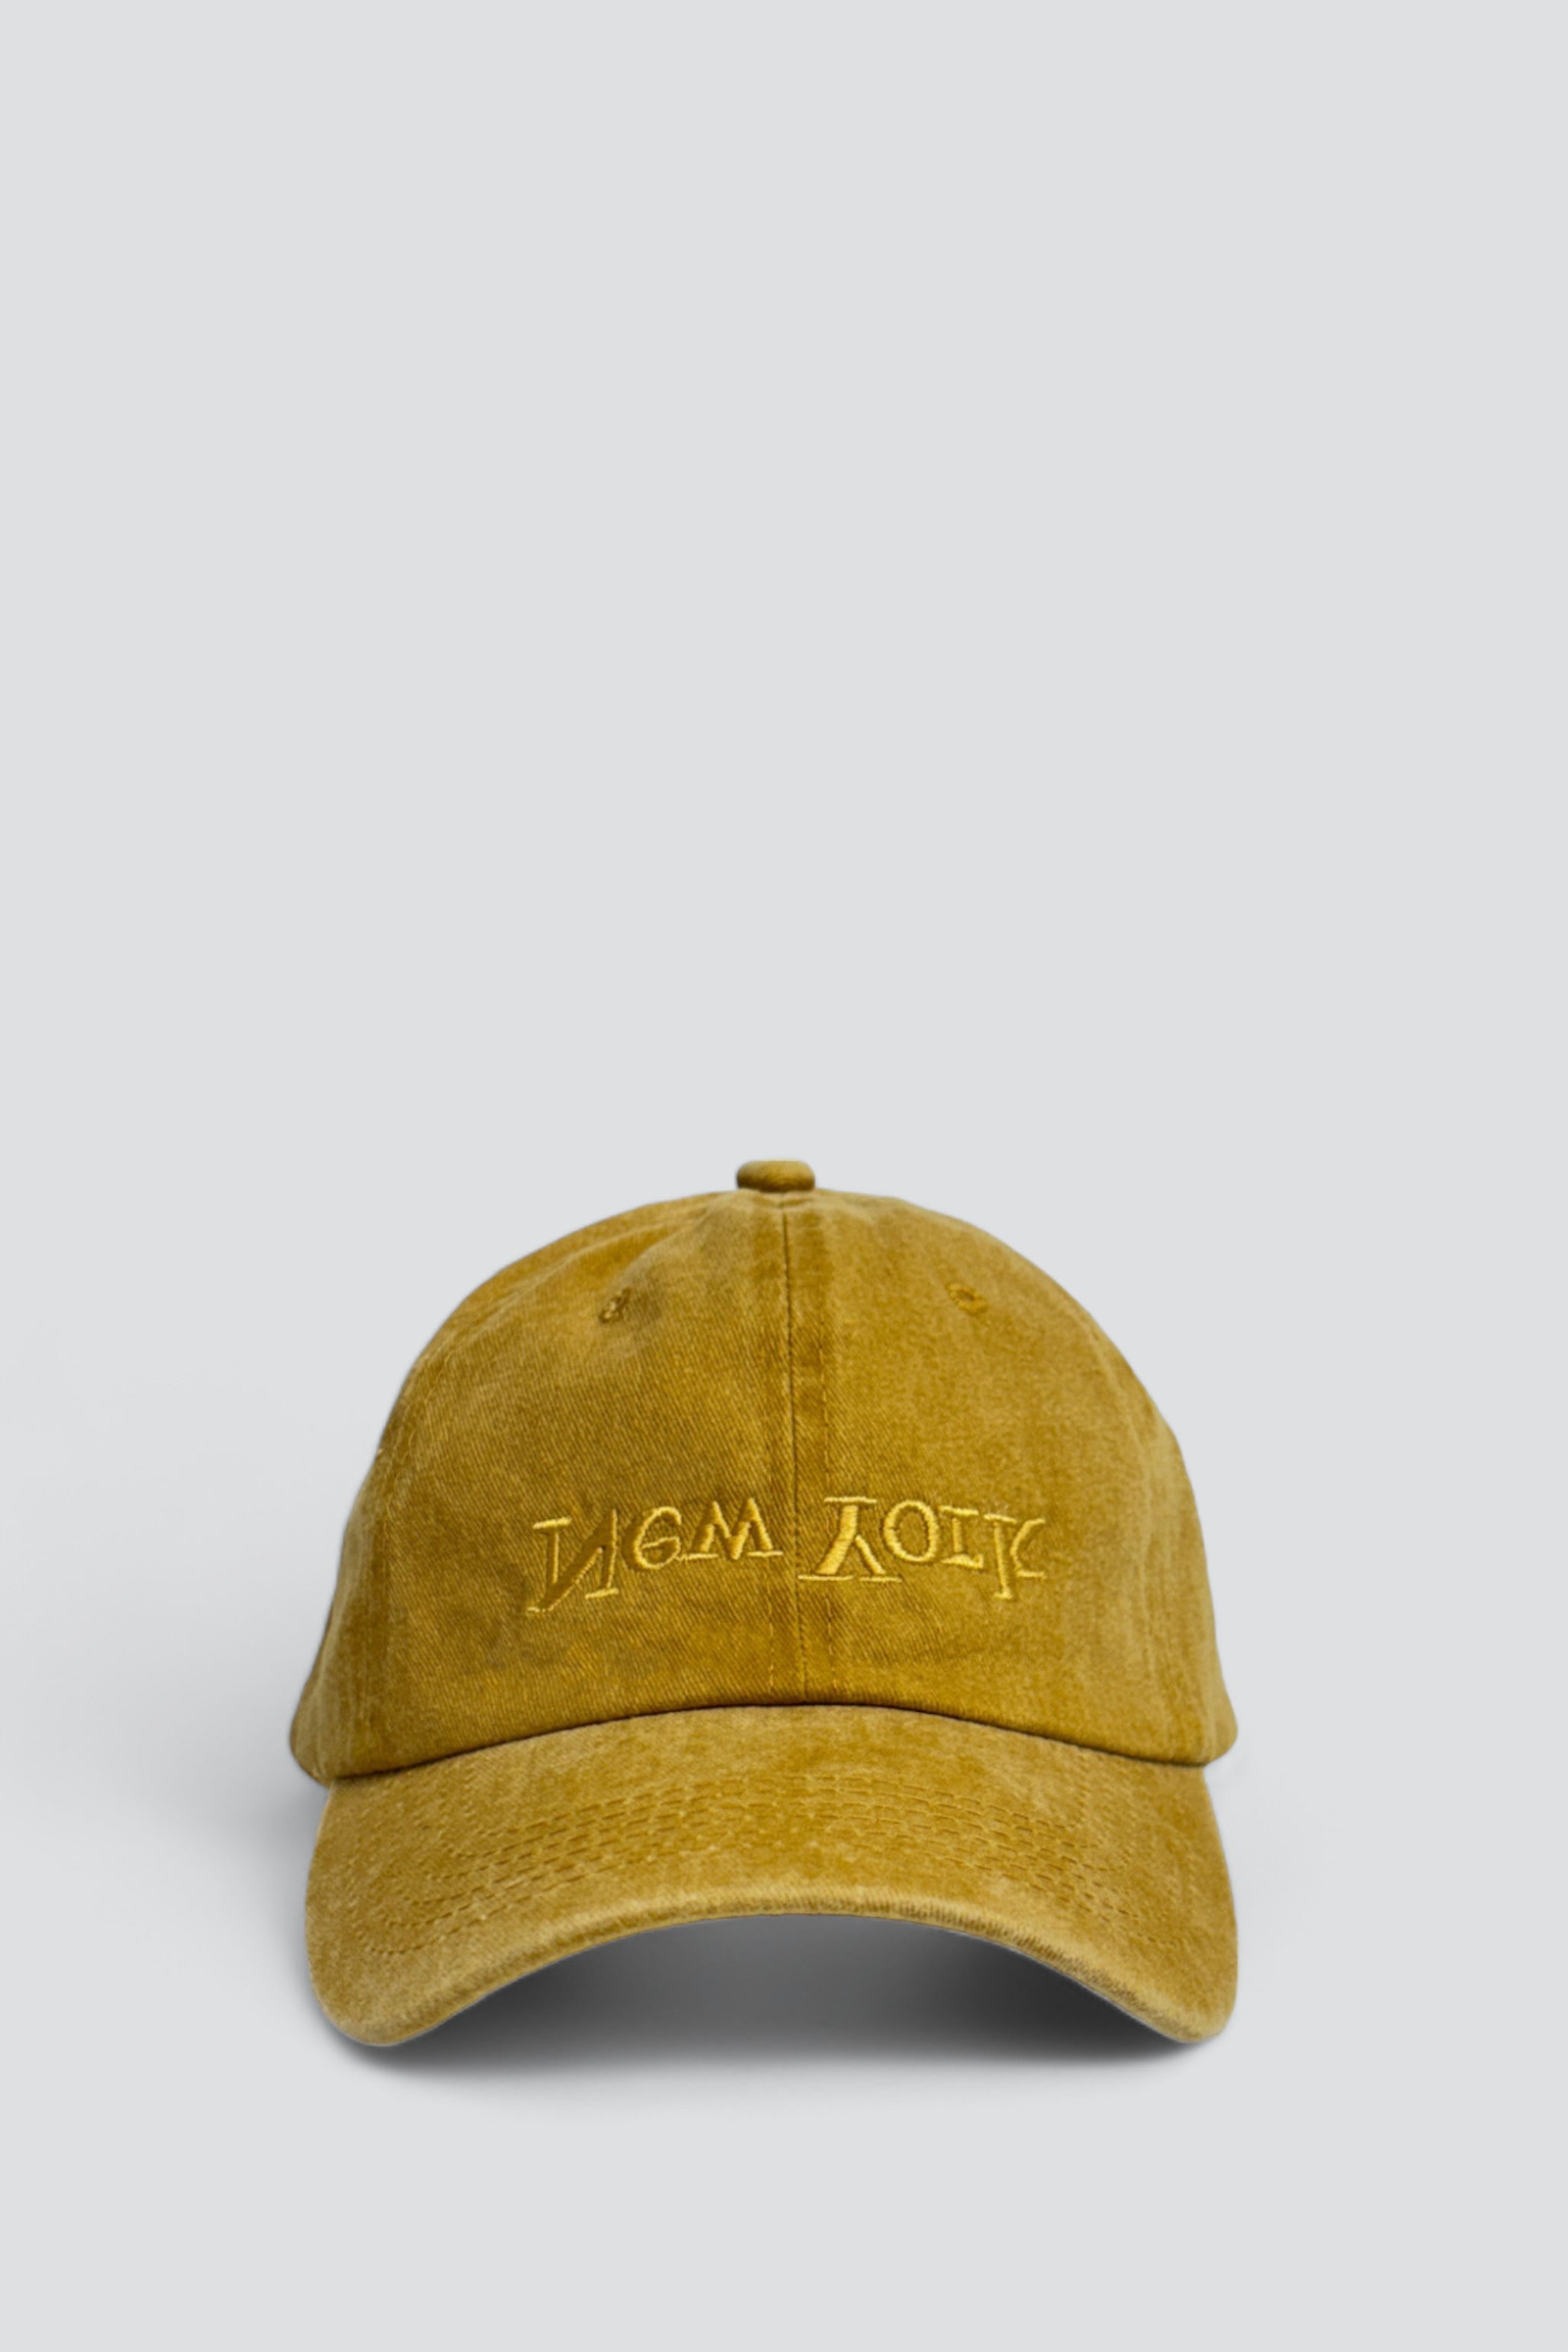 New York Embroidered Hat - Washed Yellow